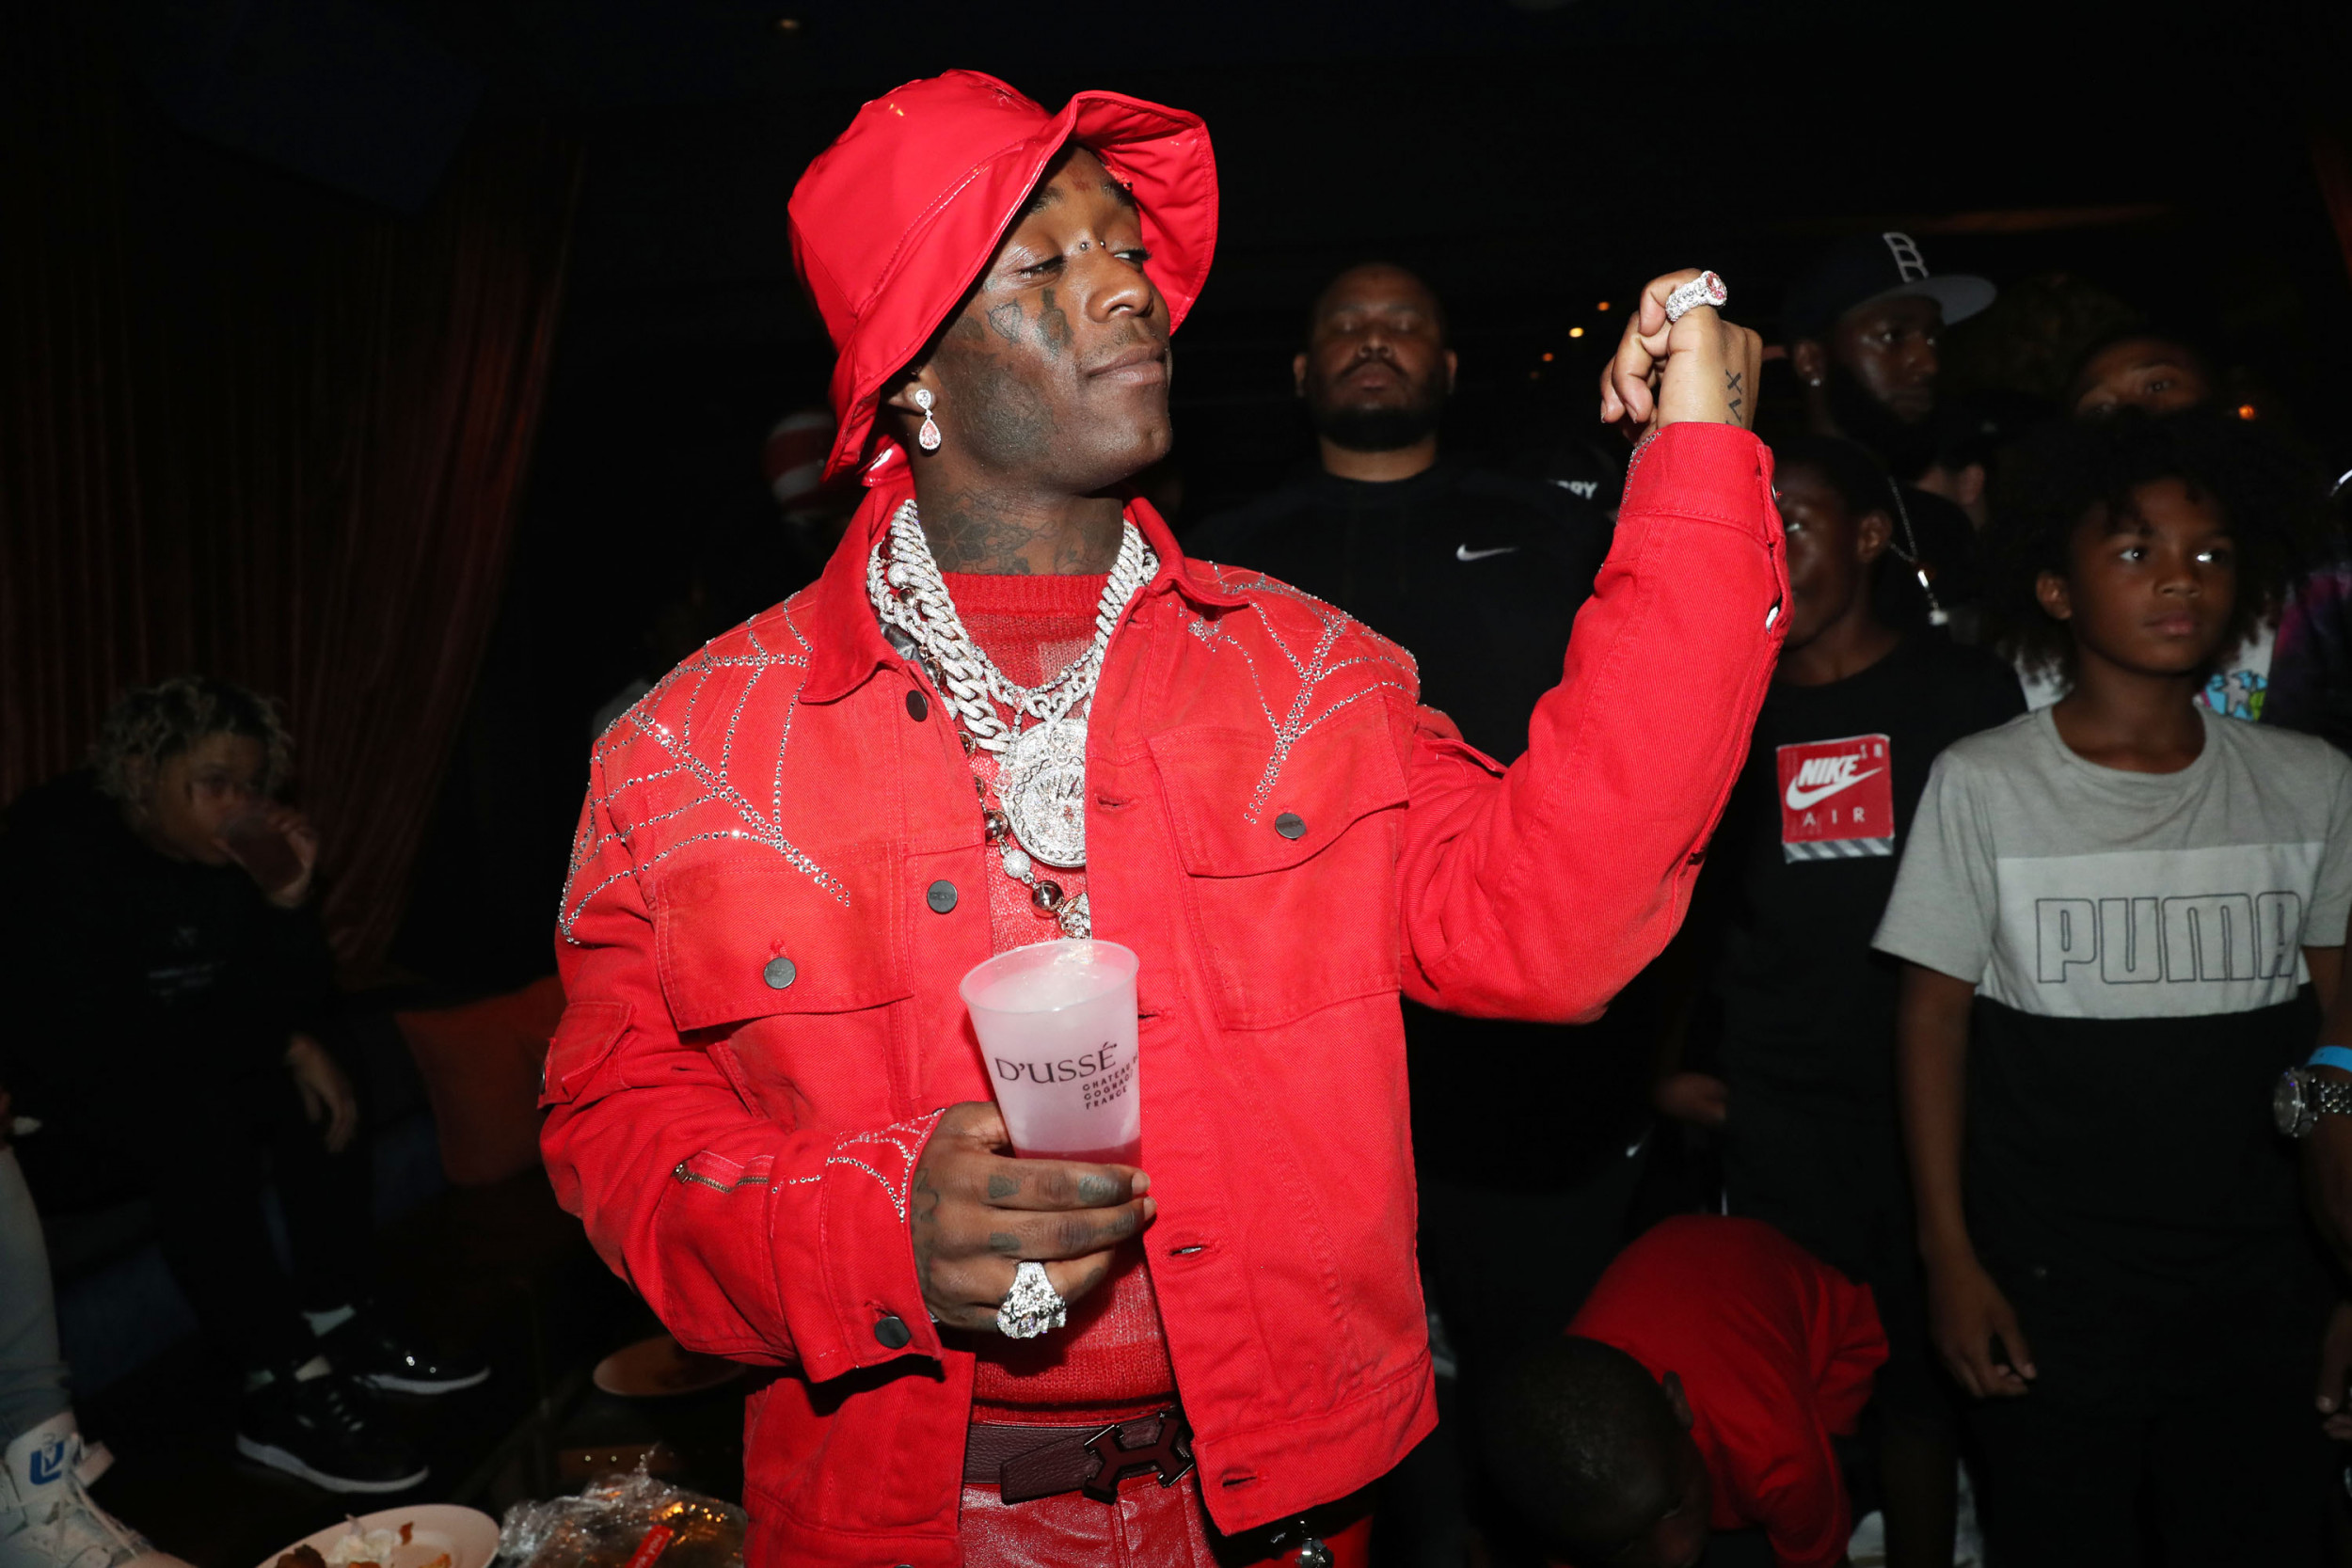 Lil Uzi Vert Will Pay Temple University Student's 90K Tuition, But the